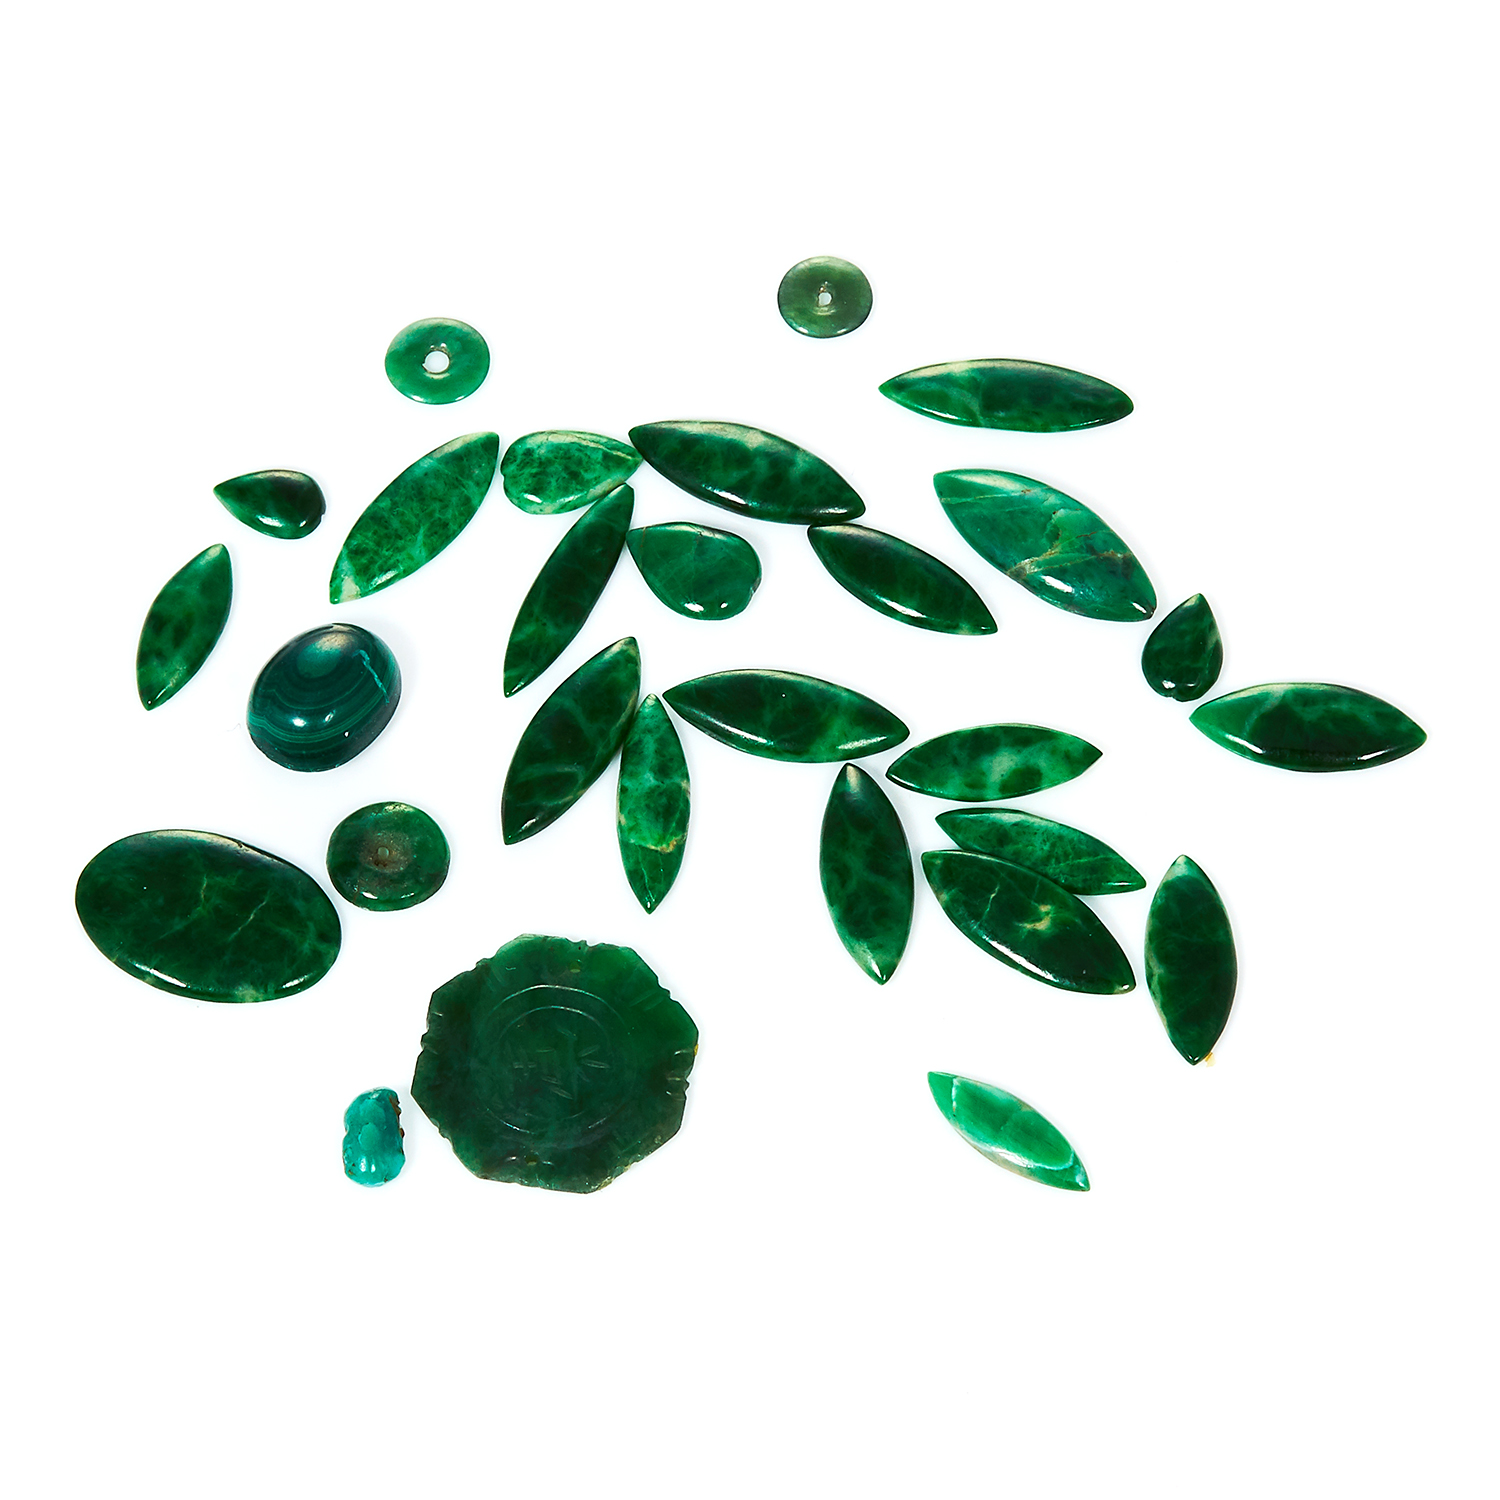 A 45.0 CARAT PARCEL OF JADE, ETC variously sized cabochons and slabs, some examples of Chinese